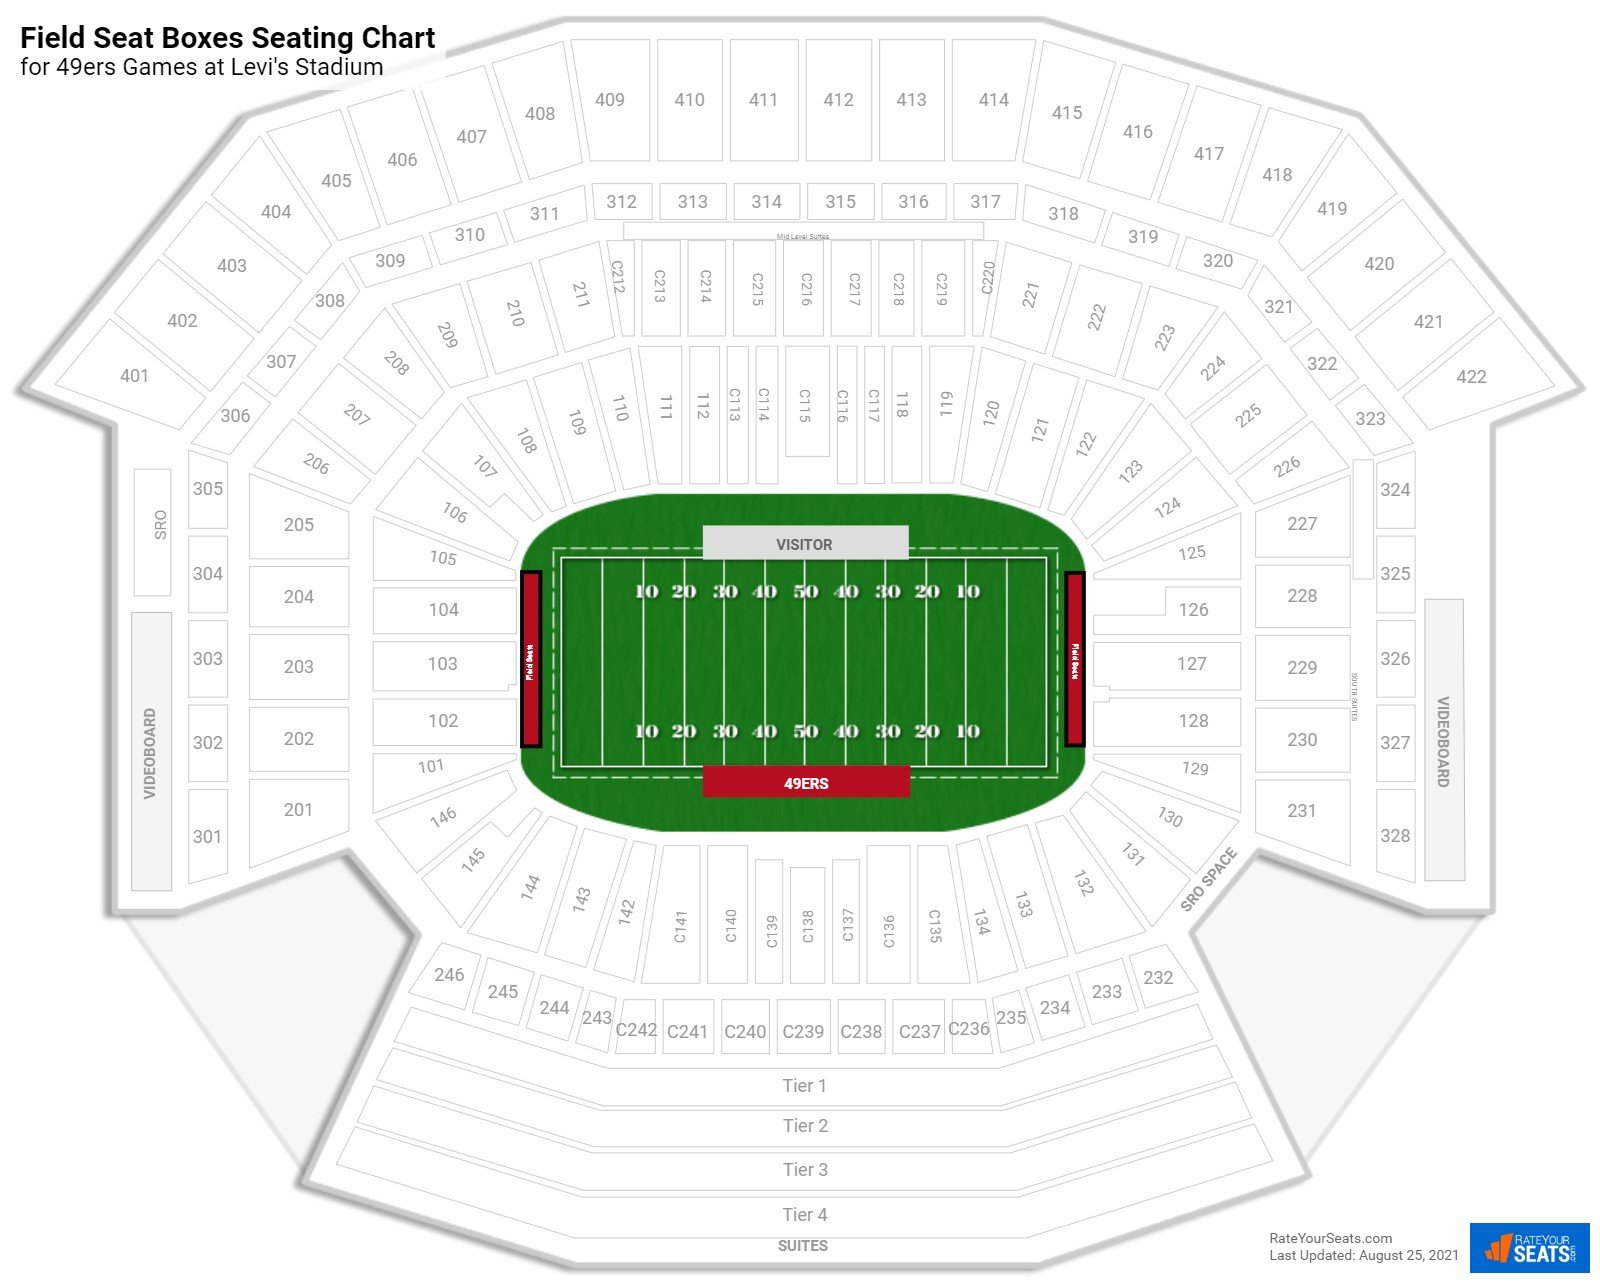 49ers Field Seat Boxes Seating Chart at Levi